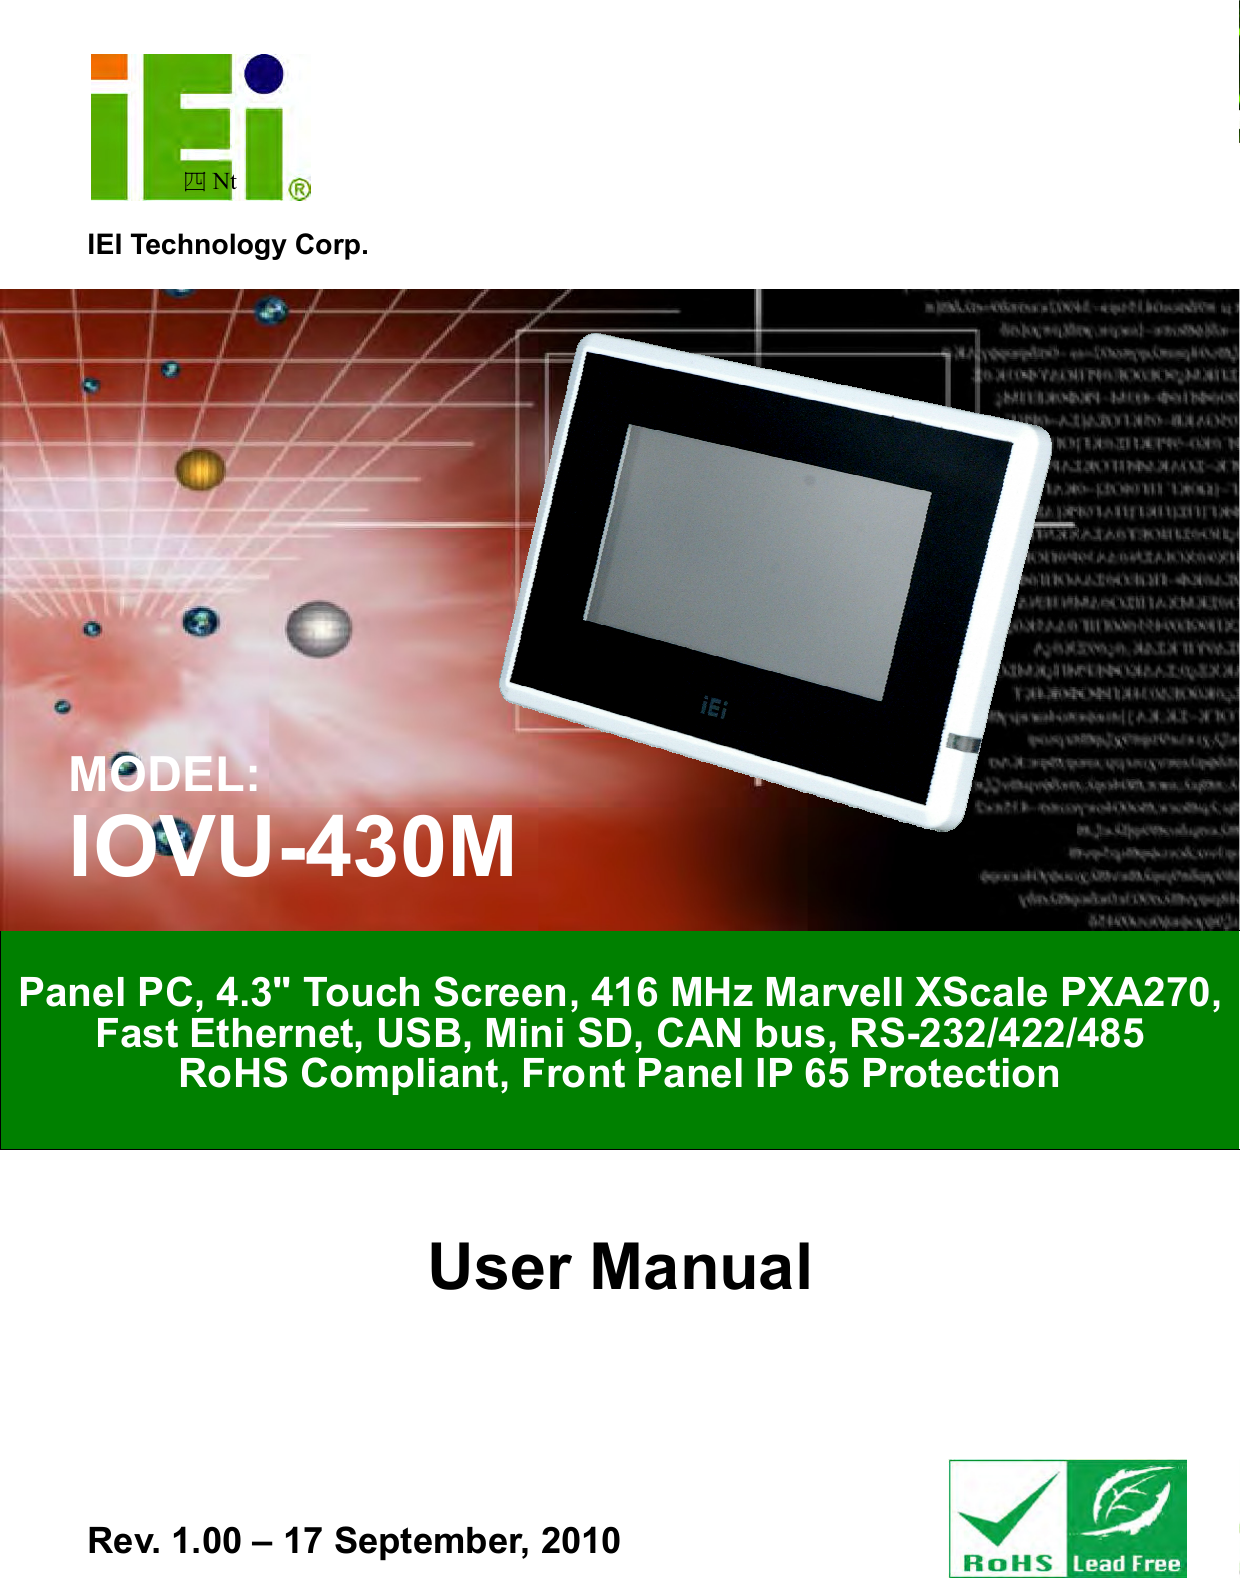   IOVU-430M Panel PC Page i IEI Technology Corp. User Manual 四Nt   MODEL: IOVU-430M Panel PC, 4.3&quot; Touch Screen, 416 MHz Marvell XScale PXA270, Fast Ethernet, USB, Mini SD, CAN bus, RS-232/422/485 RoHS Compliant, Front Panel IP 65 Protection Rev. 1.00 – 17 September, 2010 